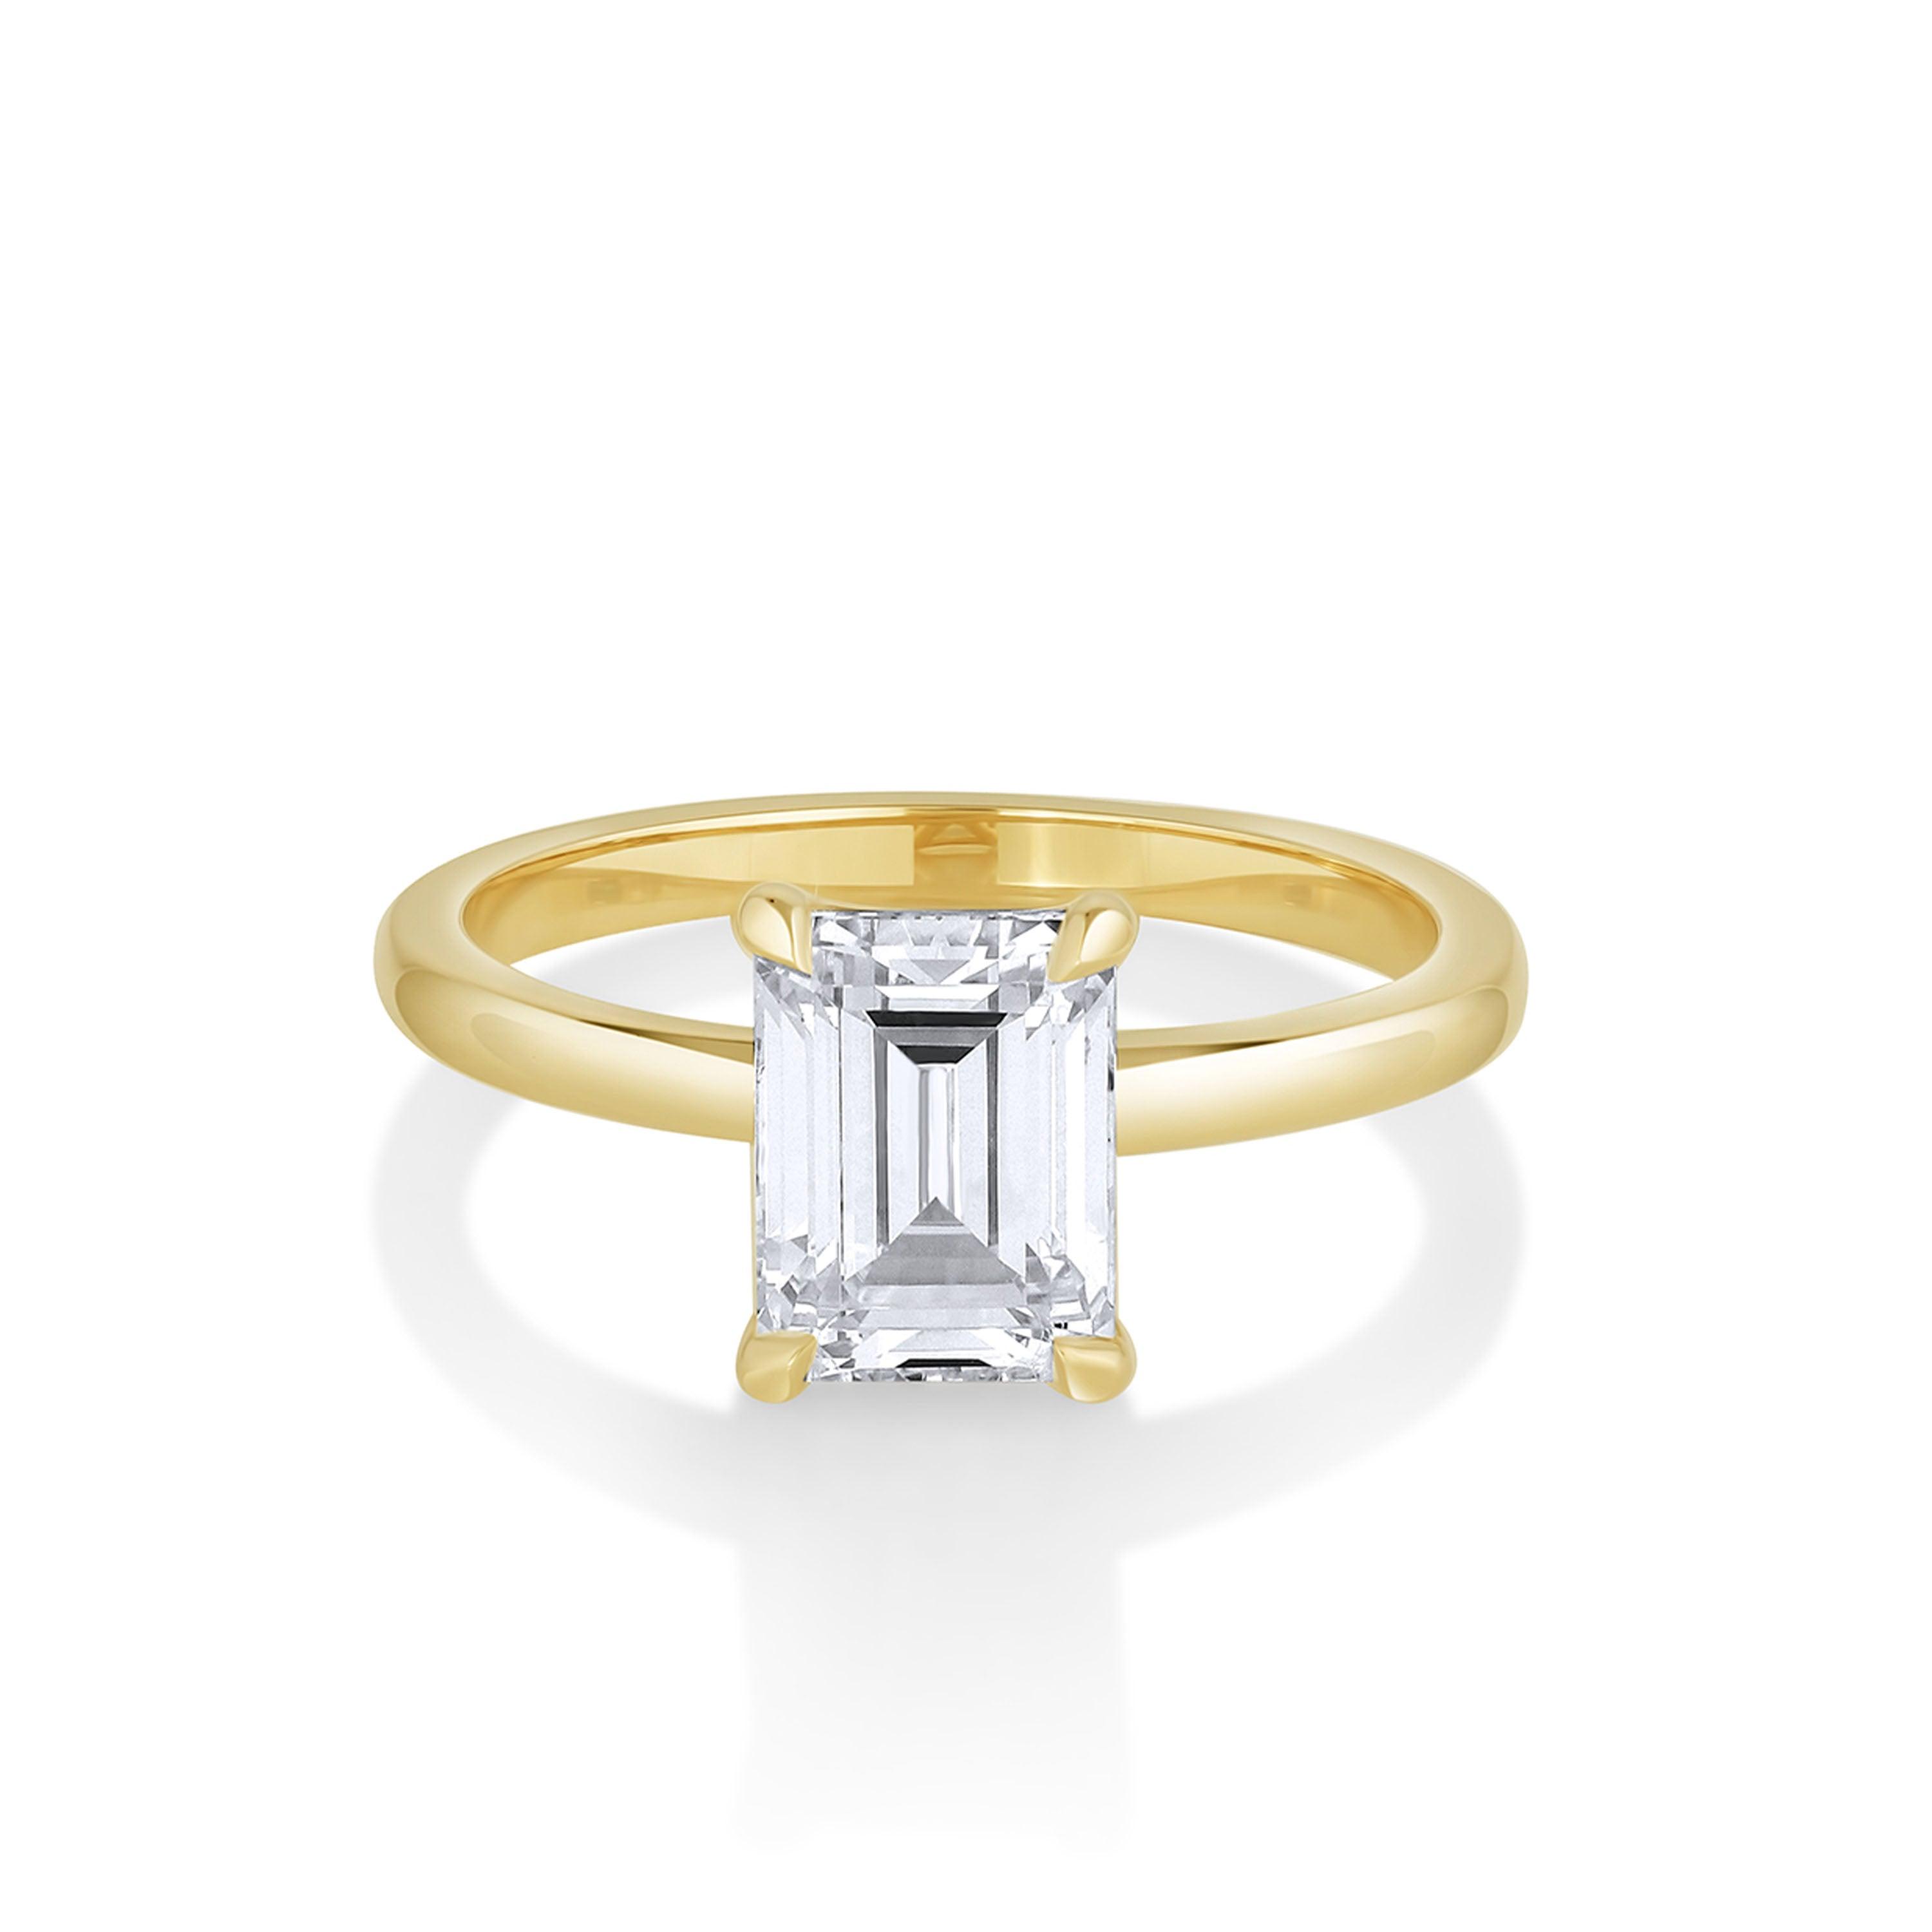 Marrow Fine Jewelry Annette Solitaire Emerald Cut White Diamond Engagement Ring